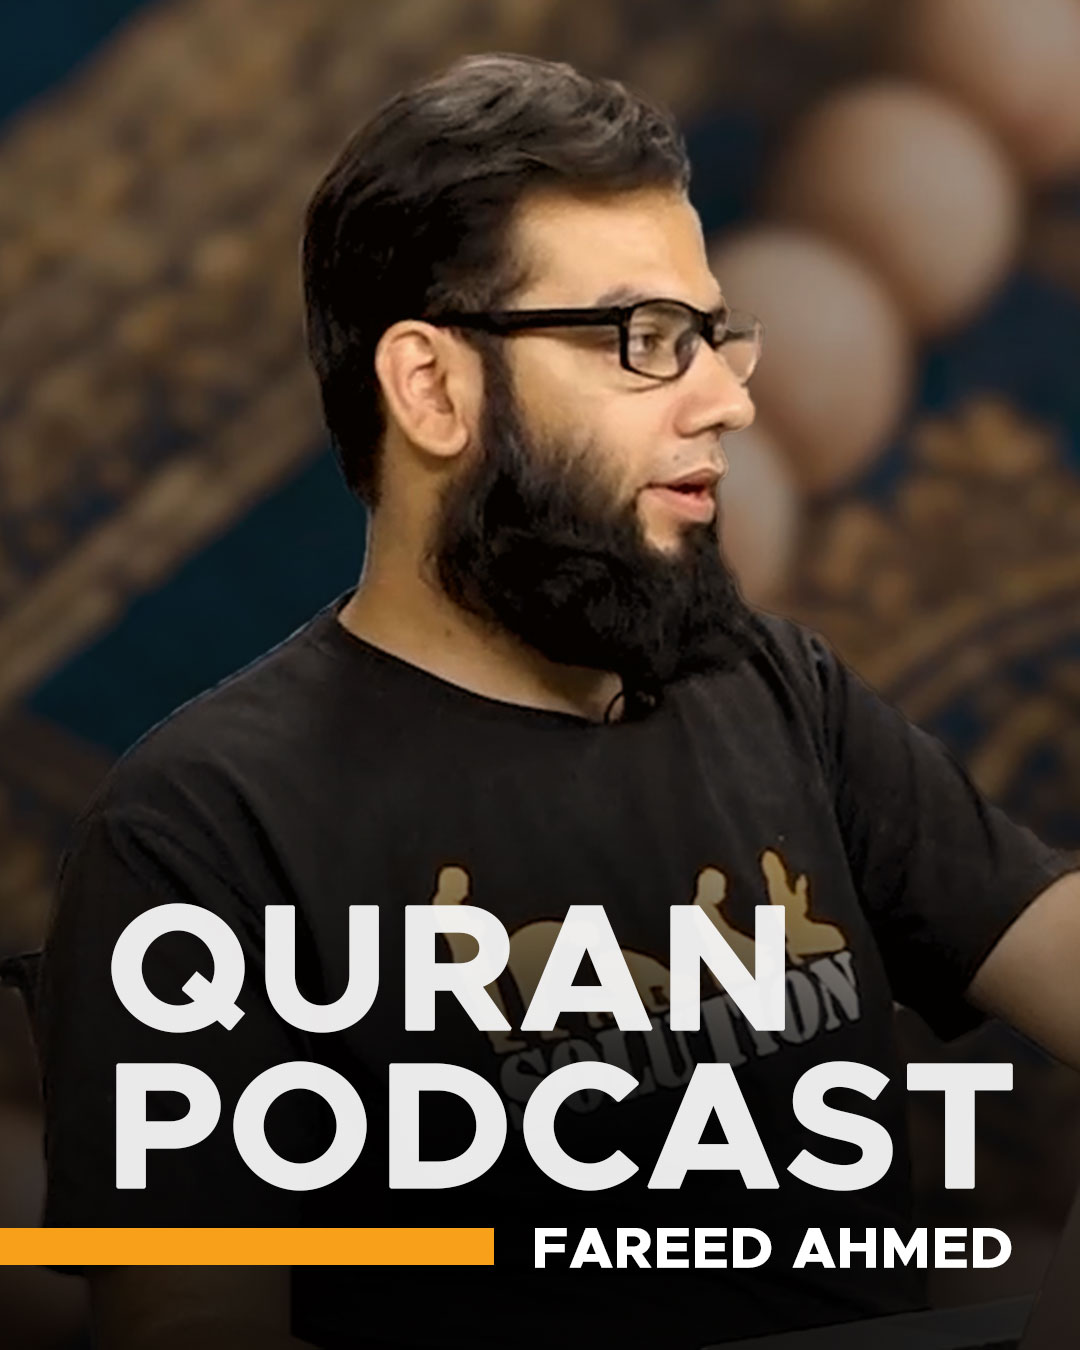 QURAN-PODCAST-SM-VERTICLE